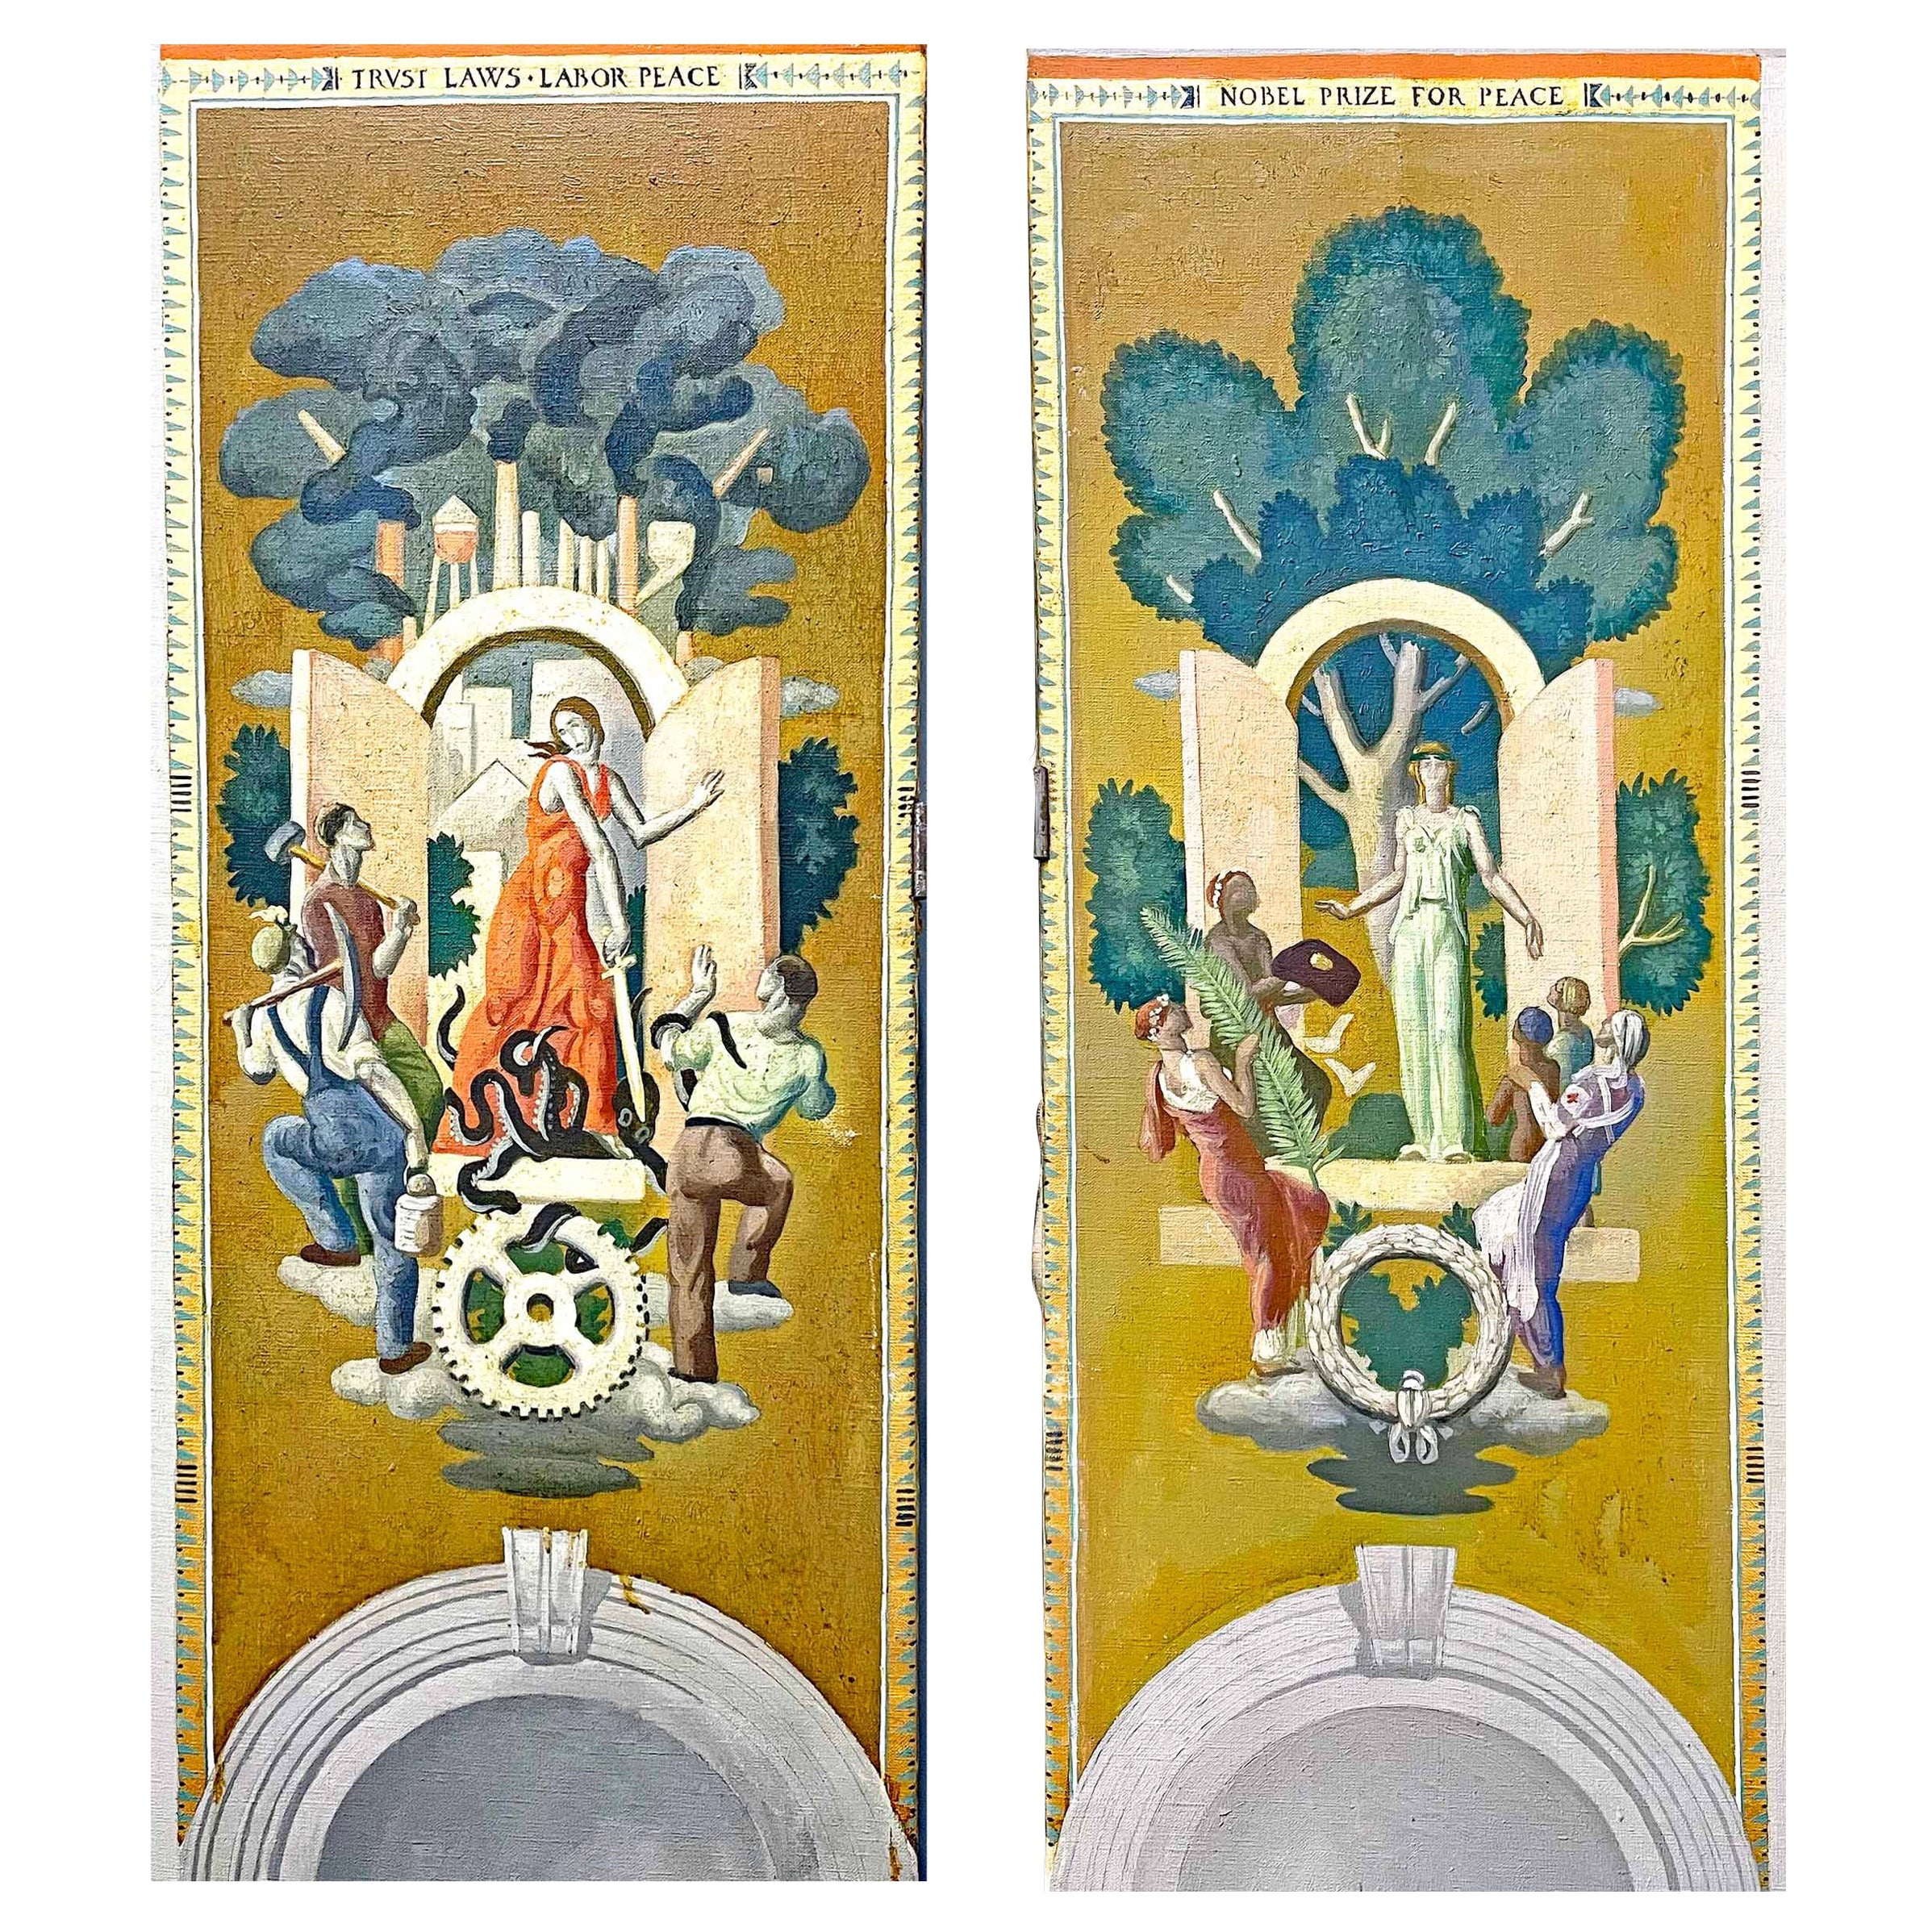 "Nobel Prize for Peace", Pair of Mural Paintings by Savage, "Trust Law Labor"